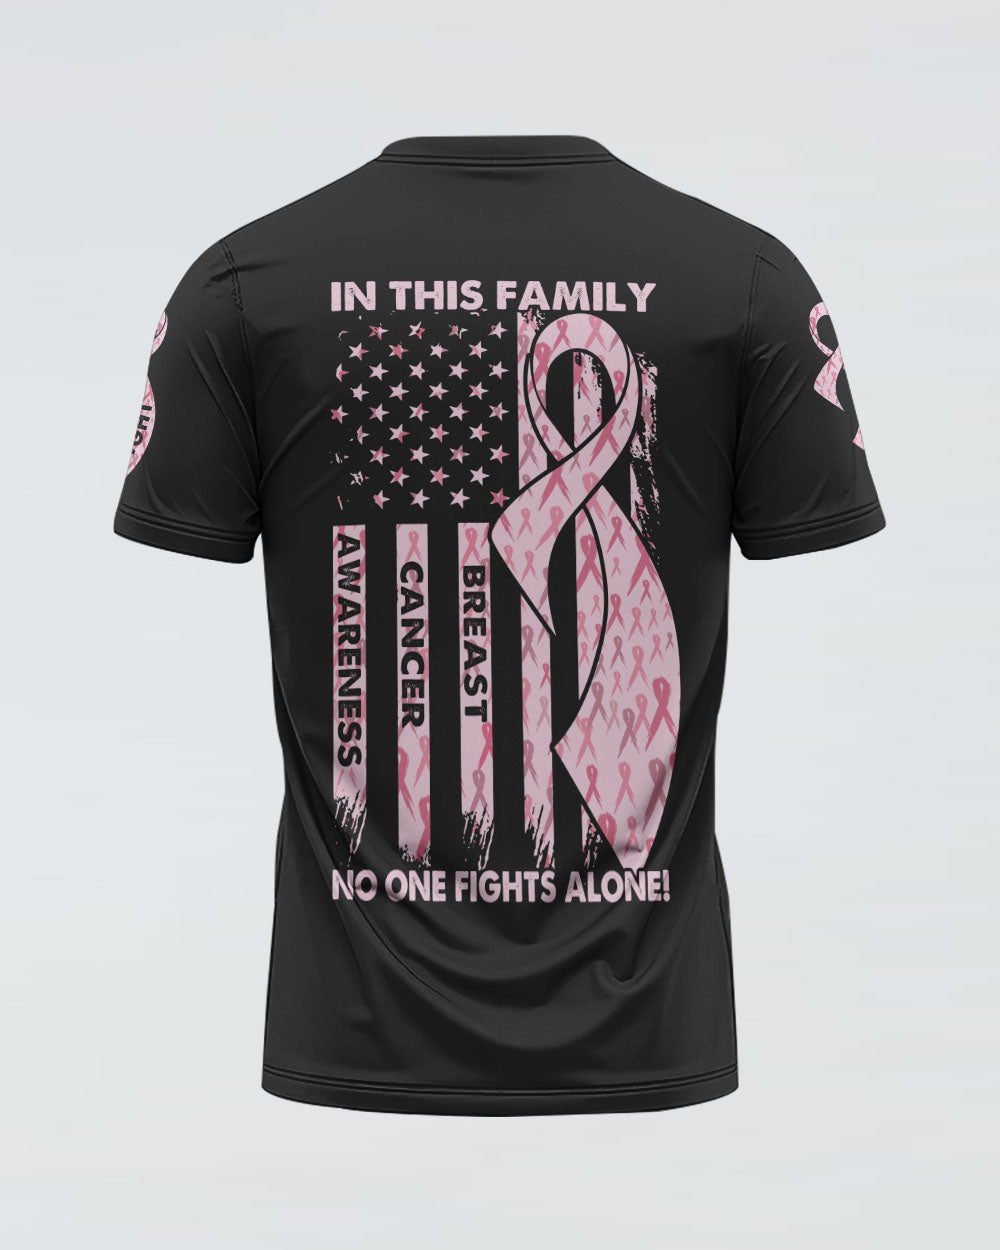 In This Family No One Fights Alone Pink Ribbon Flag Women's Breast Cancer Awareness Tshirt